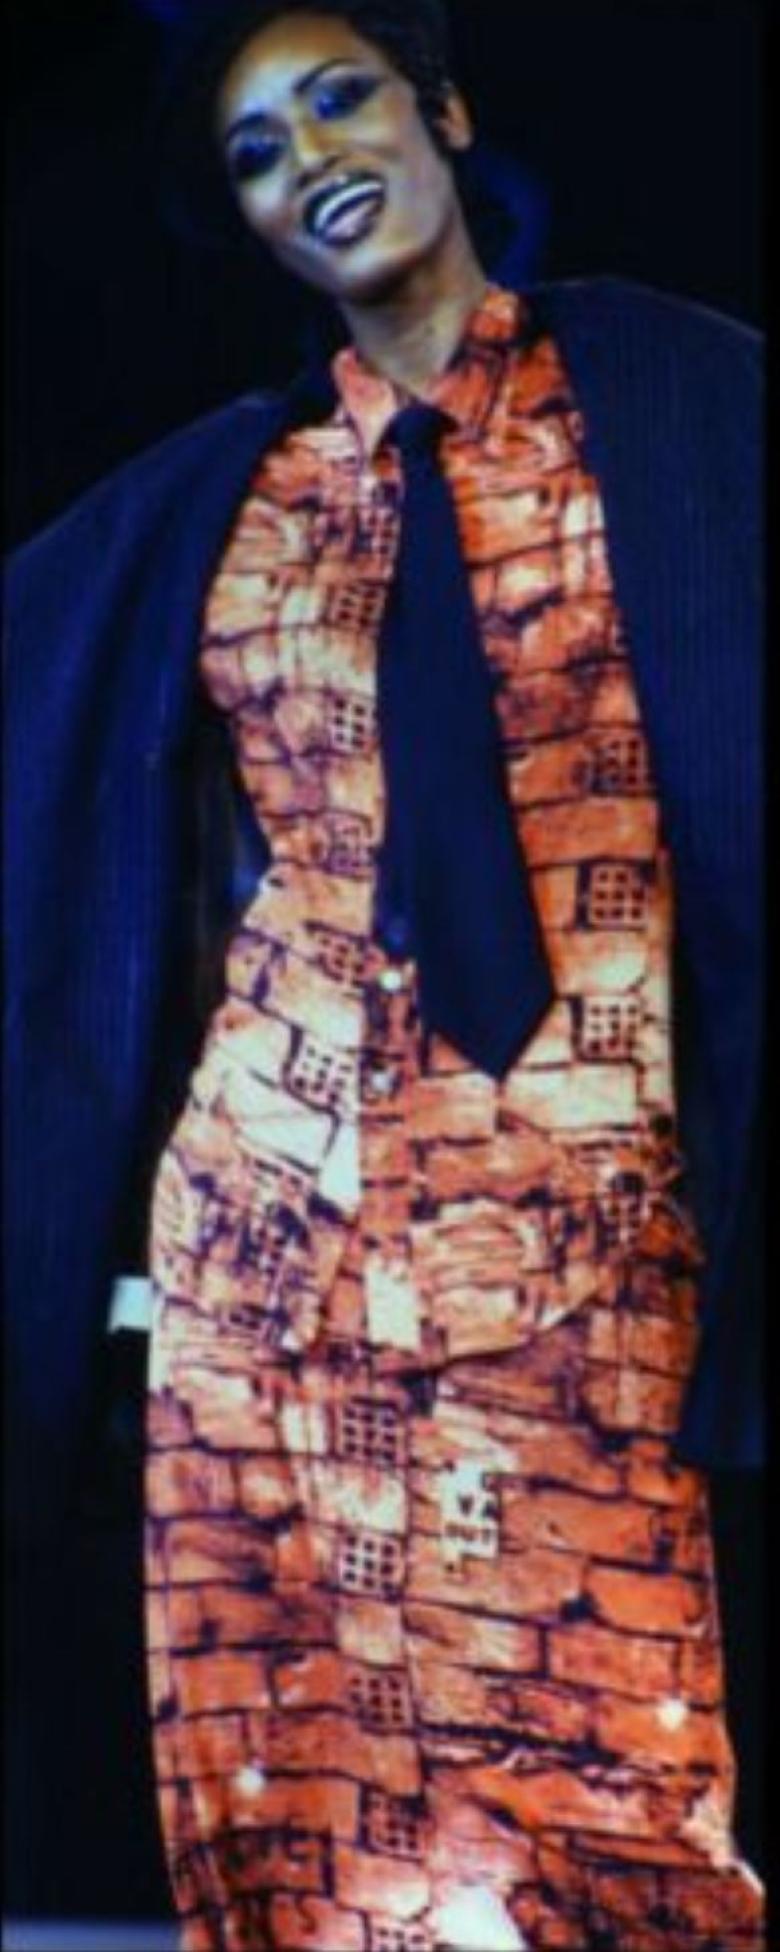 Stunning vintage Jean Paul Gaultier dress, documented and shown here on the Fall/Winter 1997 runway. This dress features an iconic and well-known graphic brick print that has graffiti like Gaultier Jeans throughout. Fight against racism